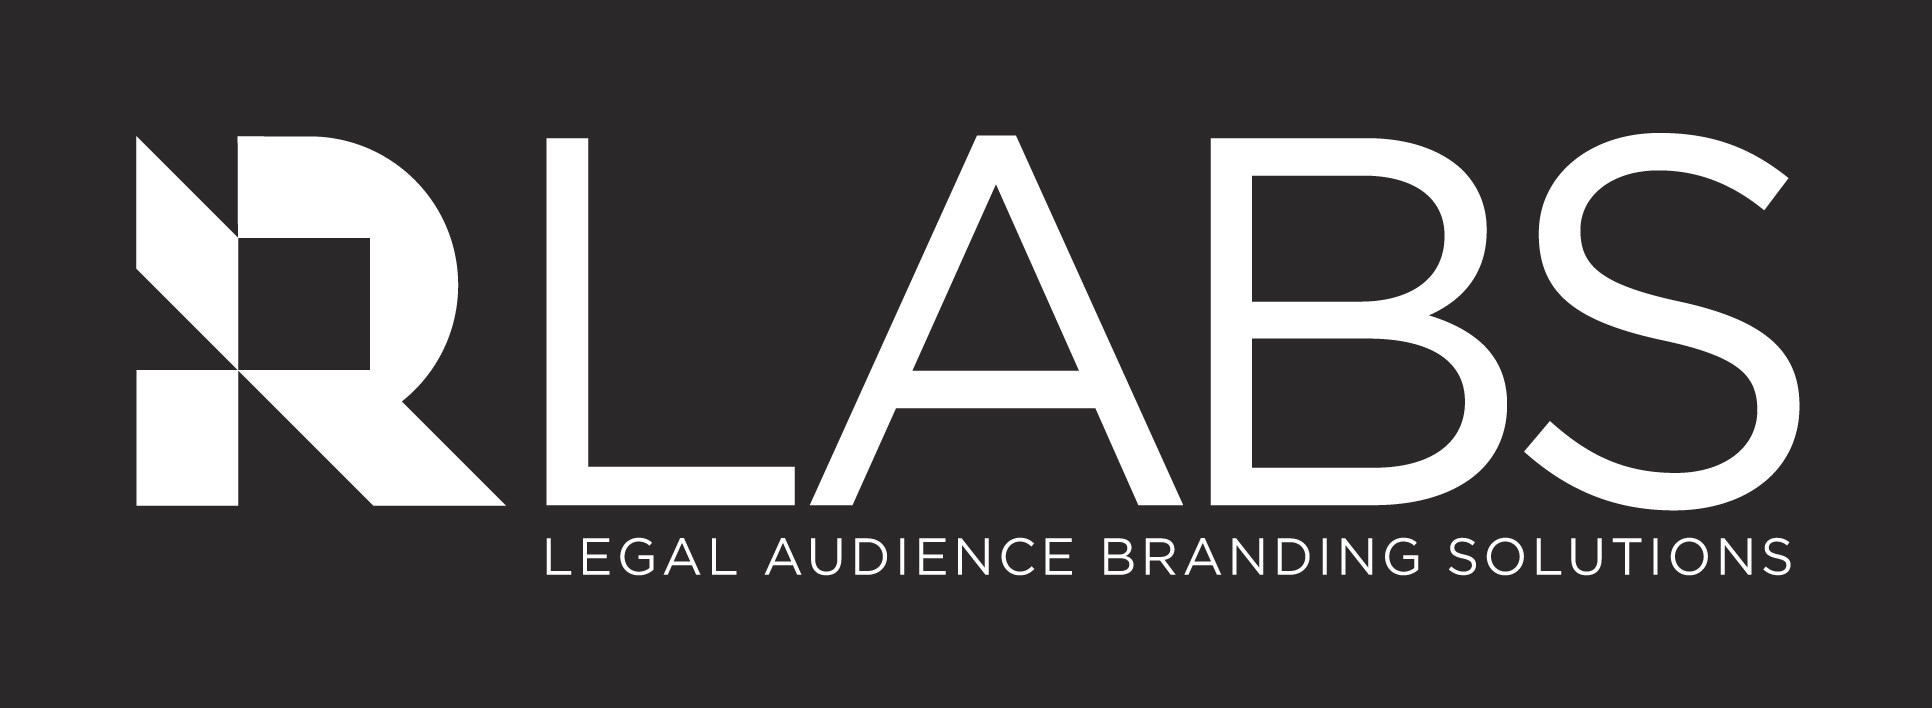 Rouge Media's Labs Network Claims Top Spot in Premium Advertising For ...